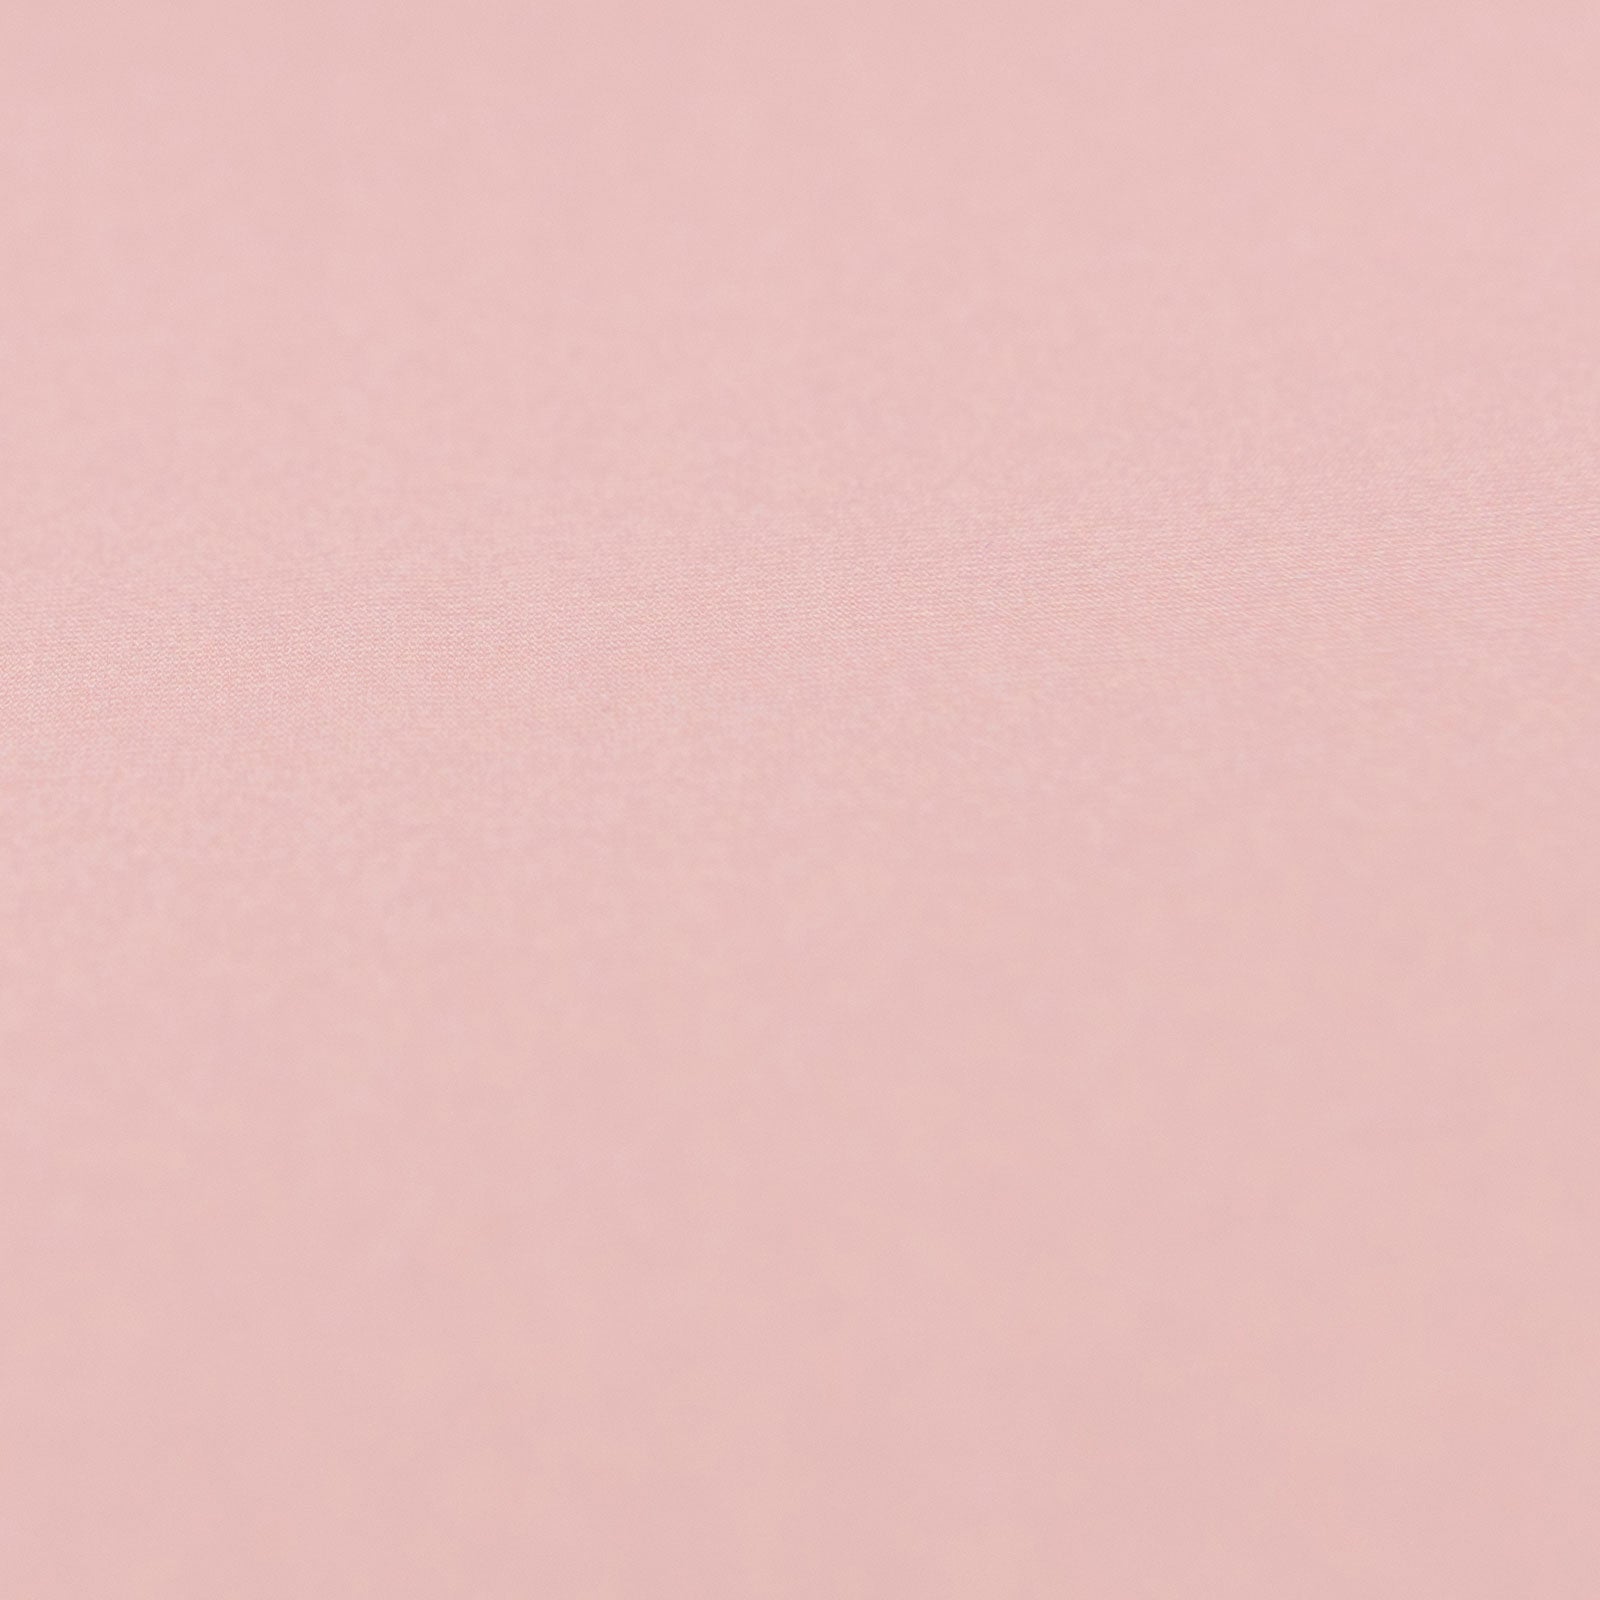 Plain pale pink printed fabric - First blush pink – Couture et Violette  Textiles